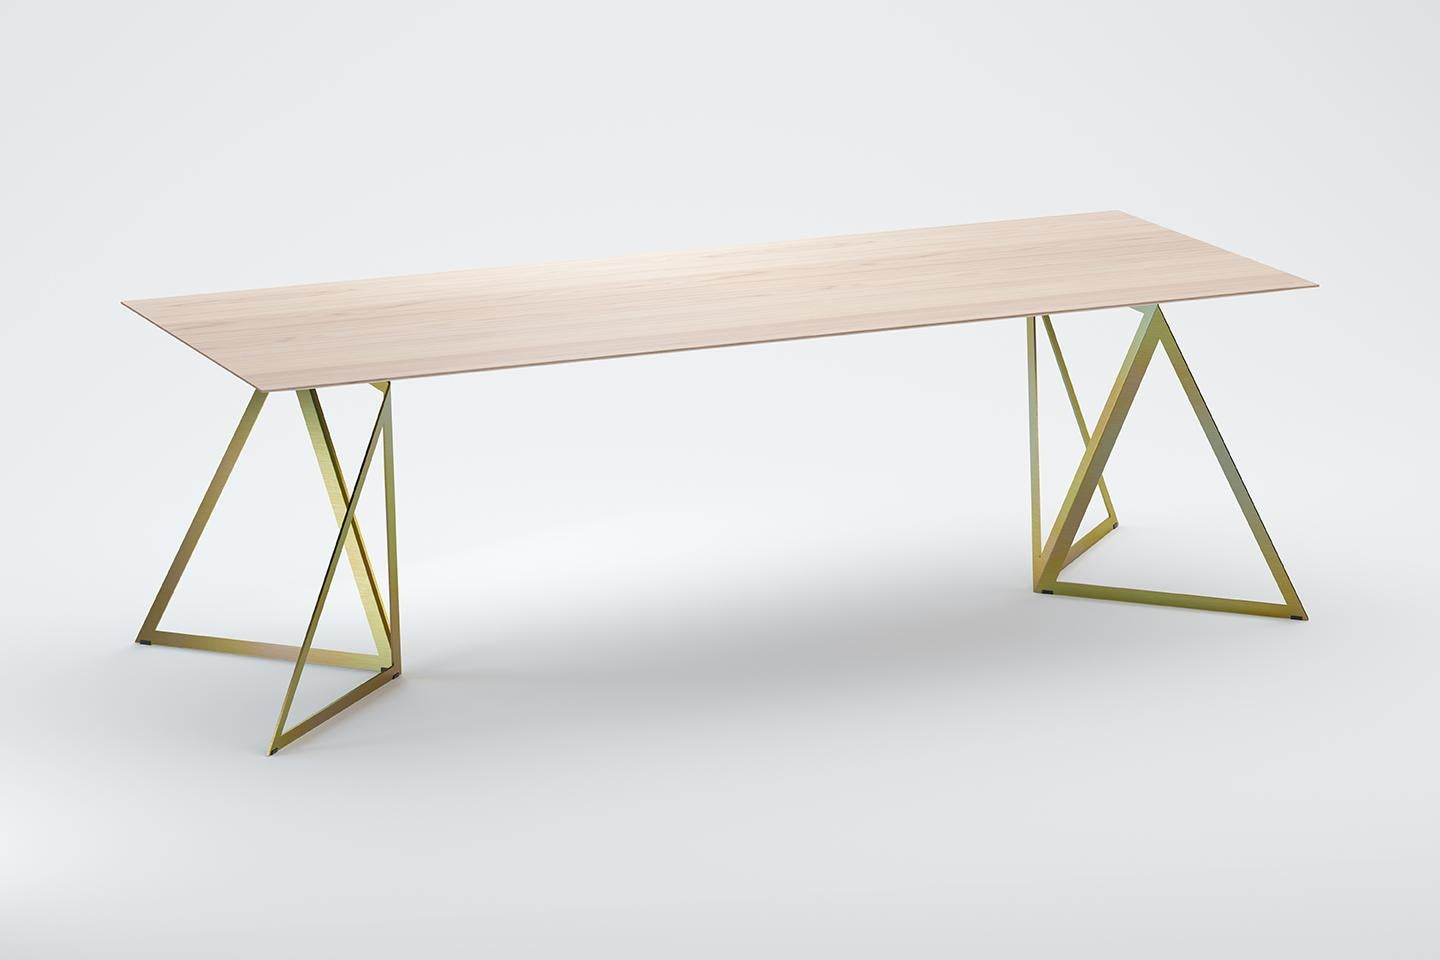 Steel stand table 240 Ash by Sebastian Scherer
Dimensions: D240 x W90 x H74 cm
Materials: Ash, Steel, Wood
Also Available: Colours:Solid wood (matt lacquered or oiled): black and white stained ash / natural oak / american walnut
Steel (matt):